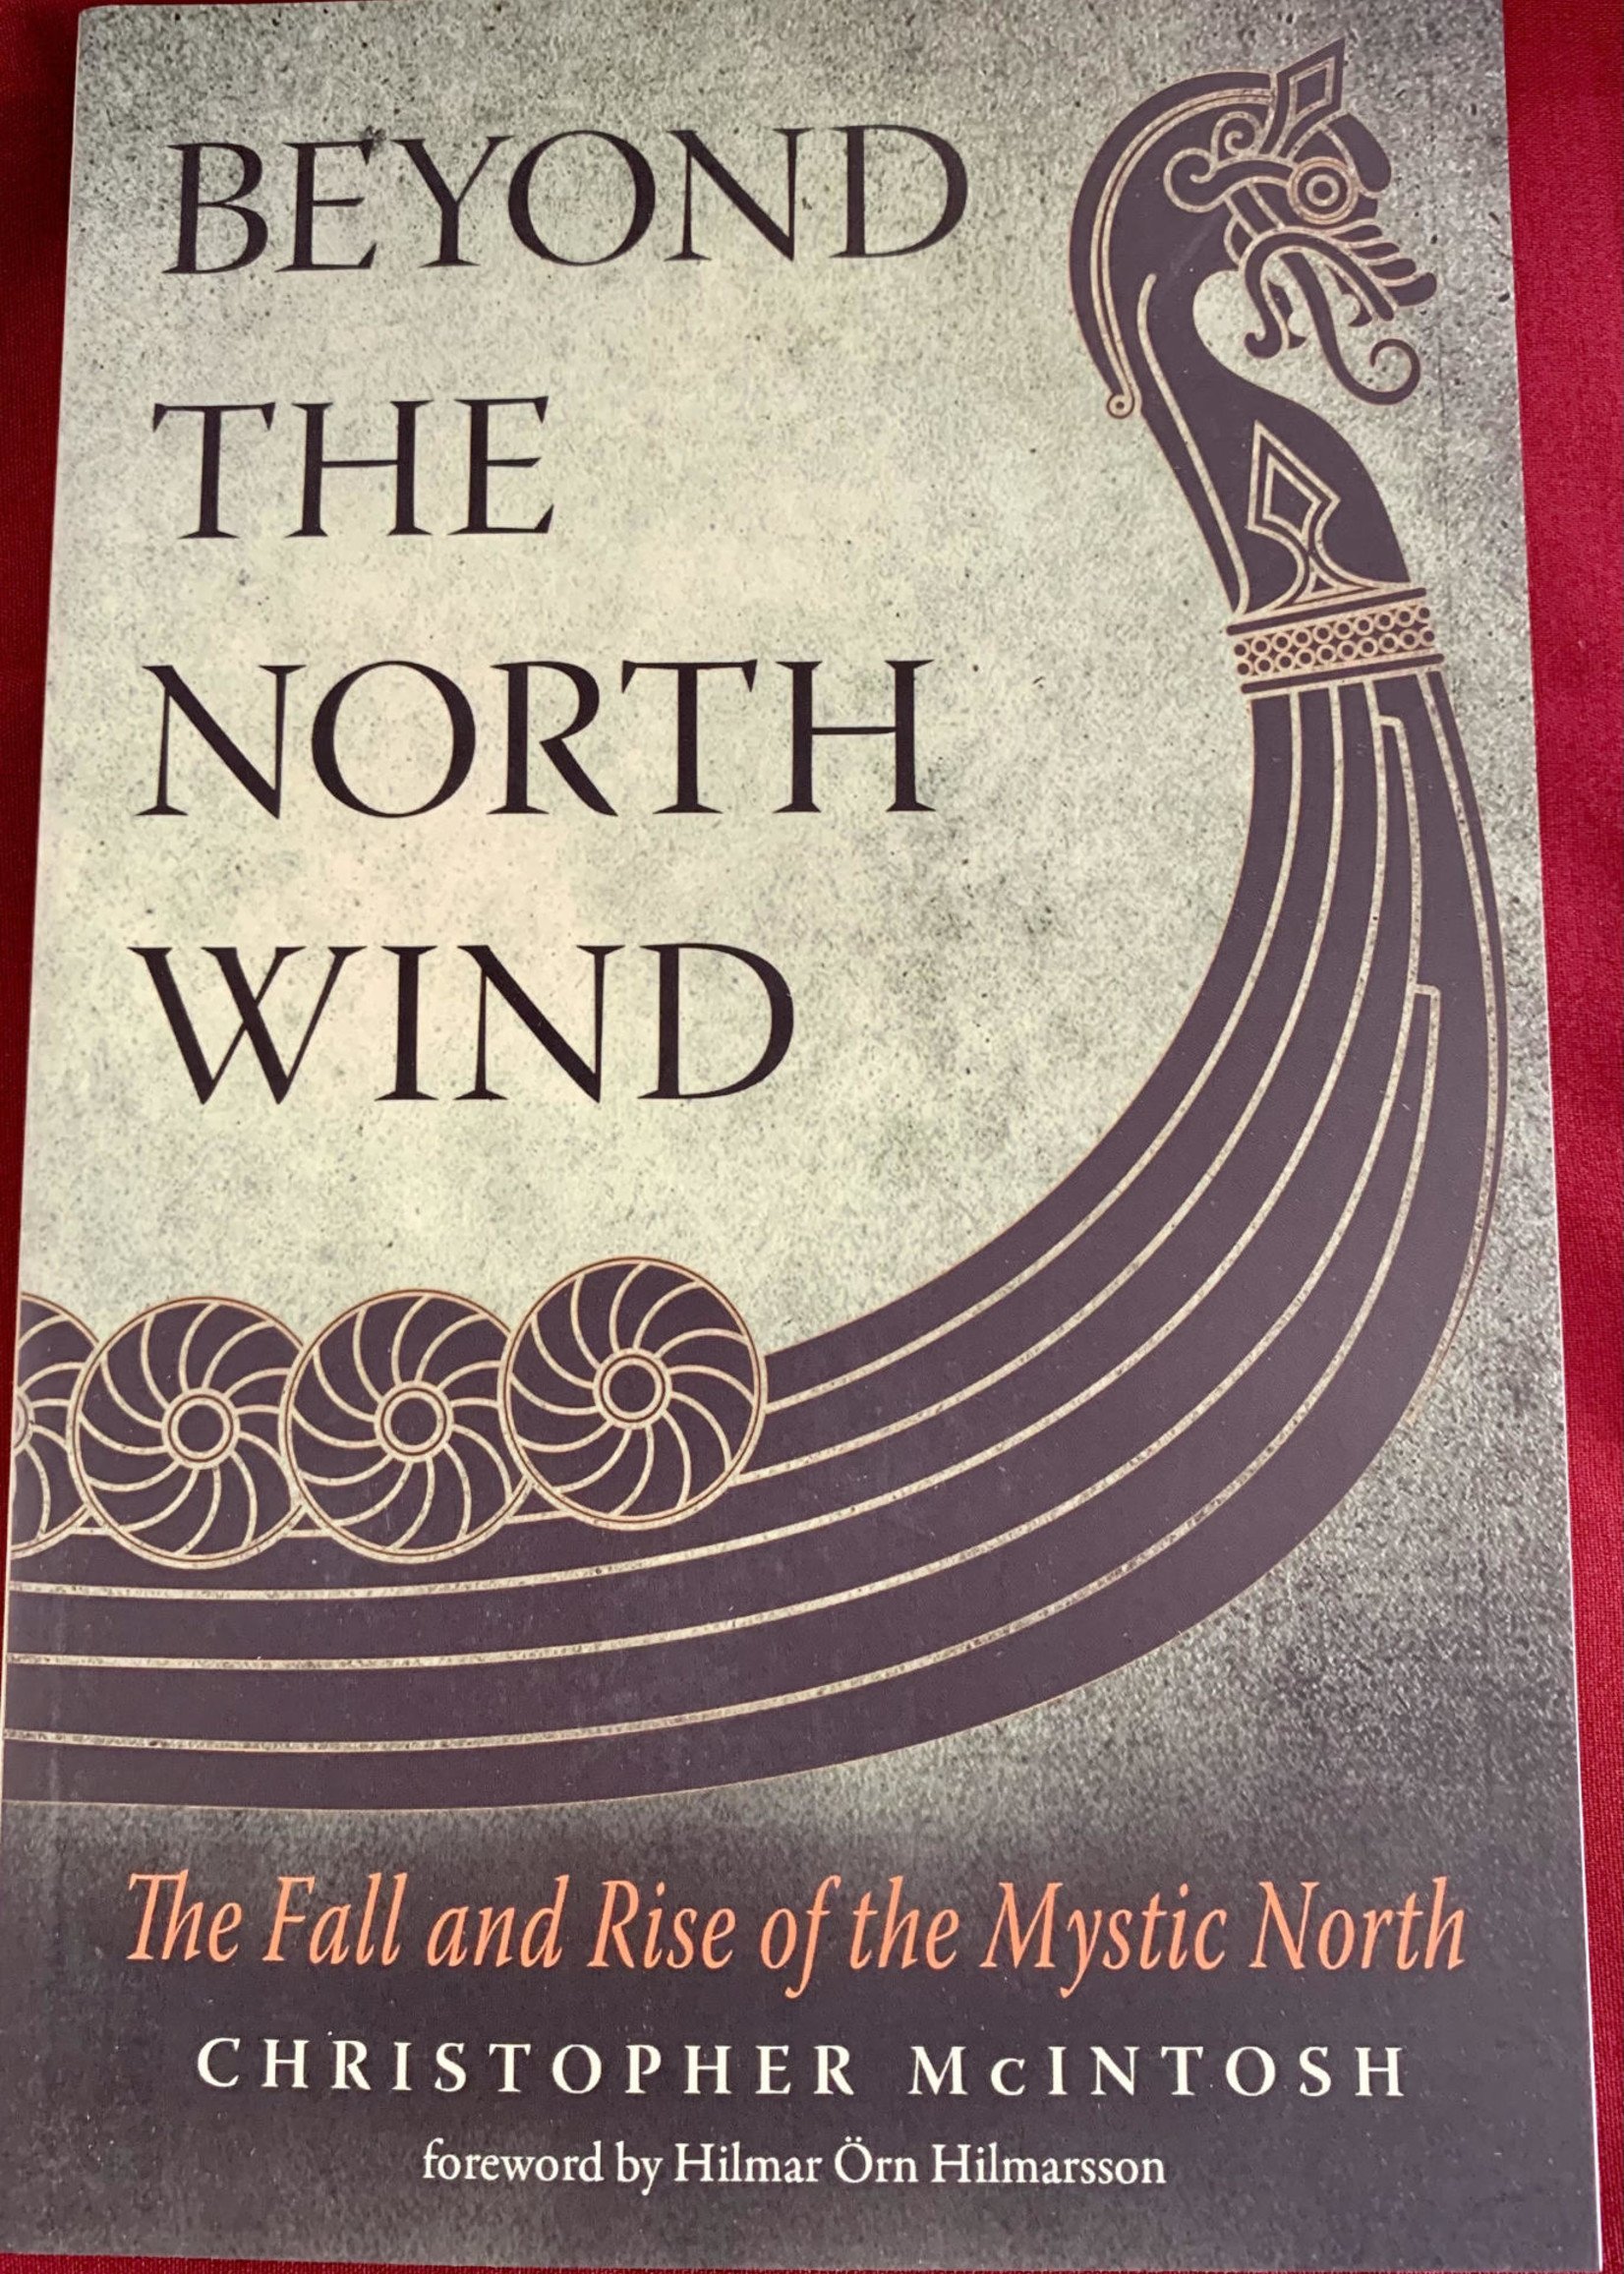 Beyond the North Wind The Fall and Rise of the Mystic North - Christopher McIntosh, Foreword by Hilmar Örn Hilmarsson